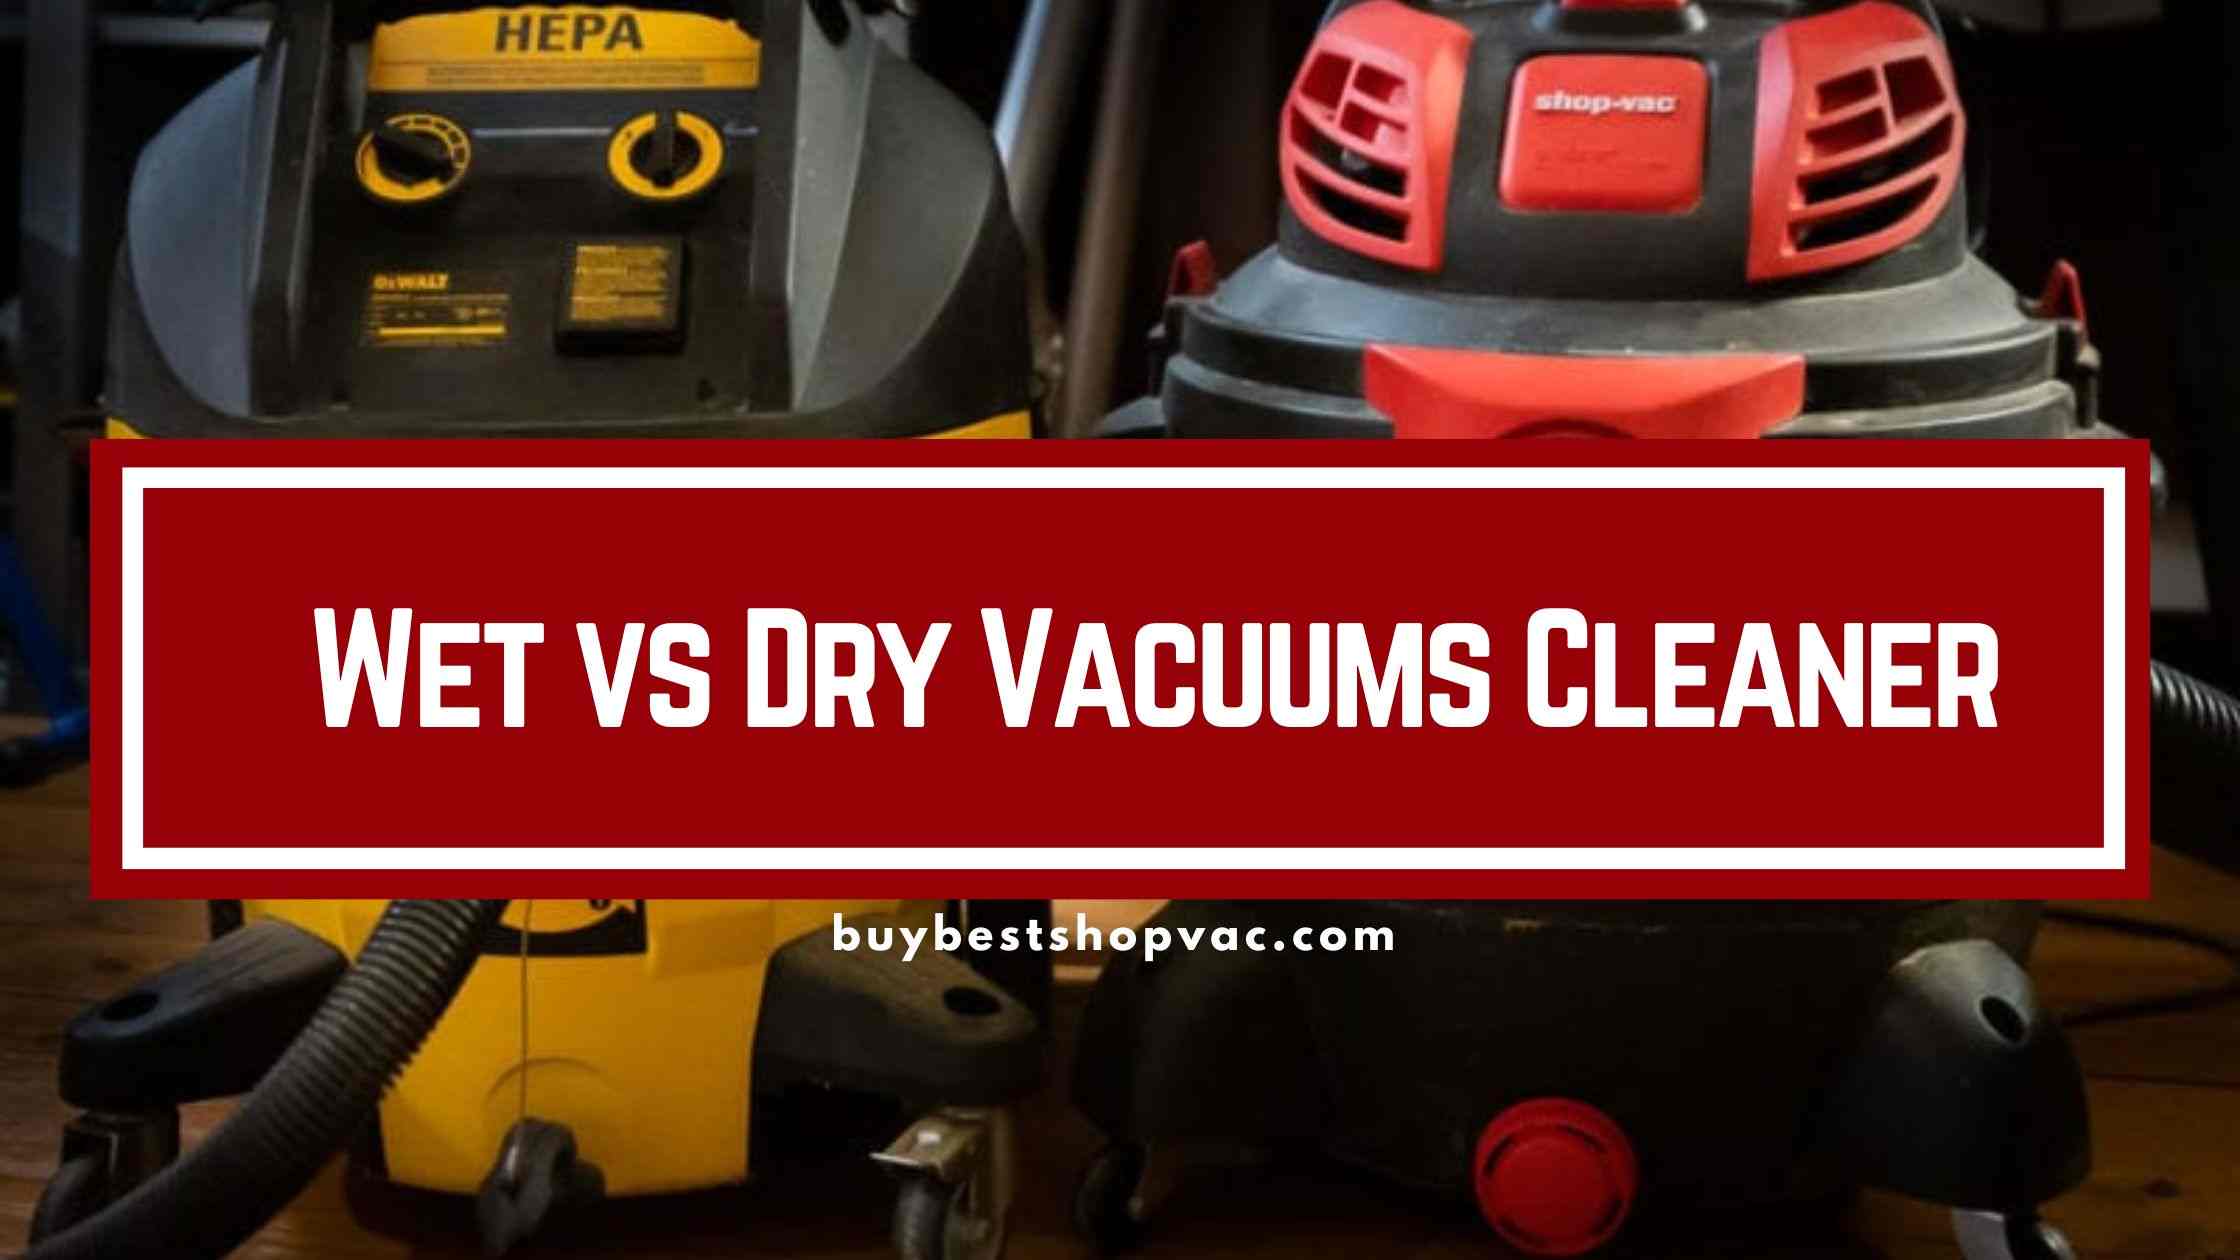 Wet vs Dry Vacuums Cleaner | Which One Should You Buy?